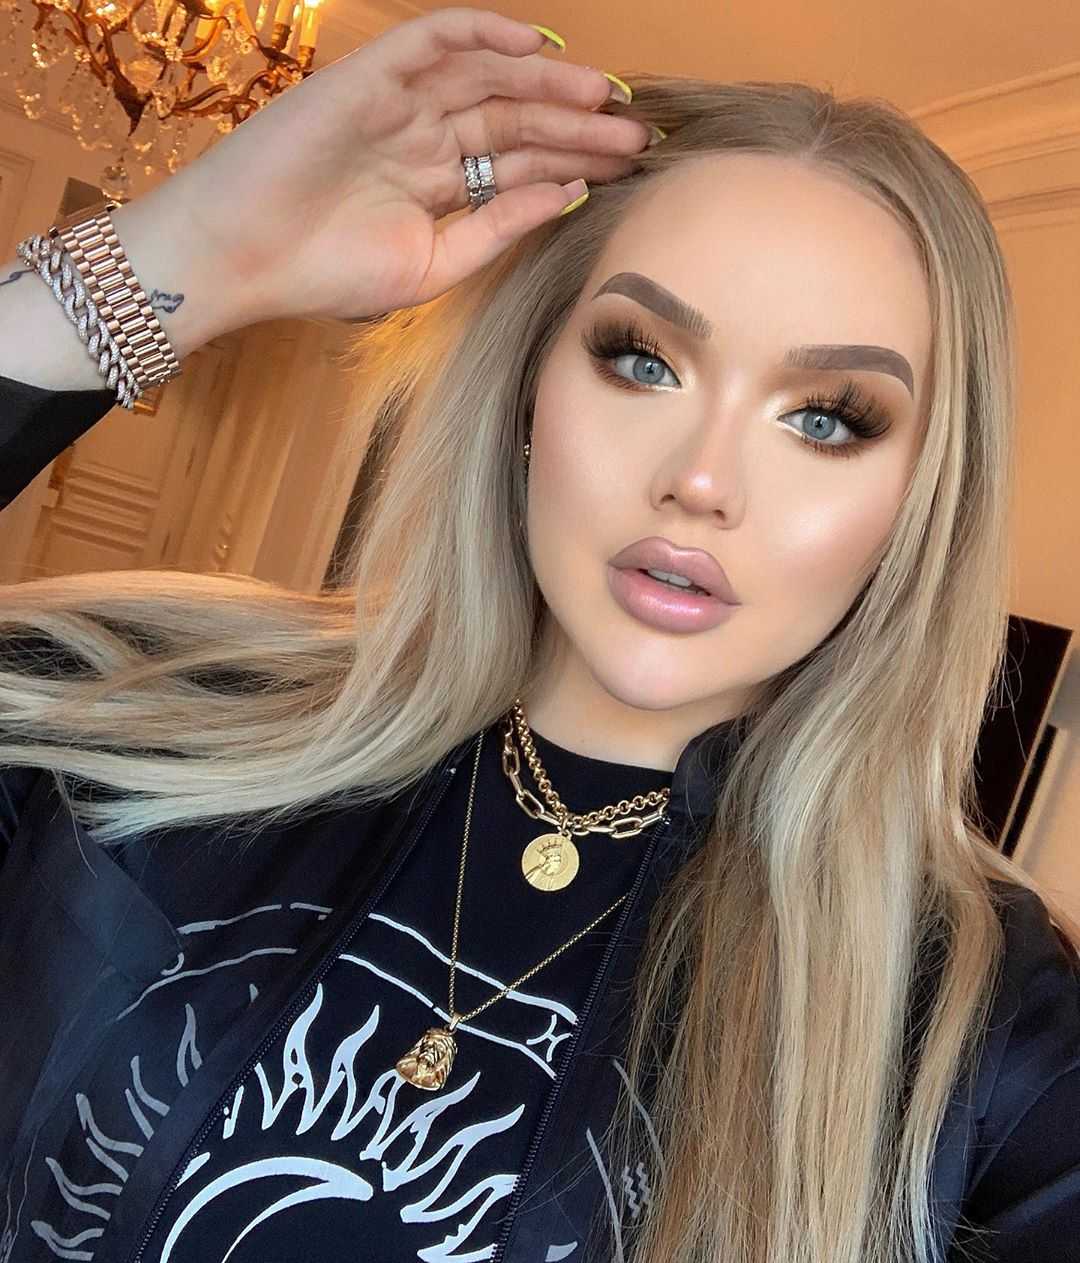 51 Sexy Nikkie Tutorials Boobs Pictures Which Are Inconceivably Beguiling 48